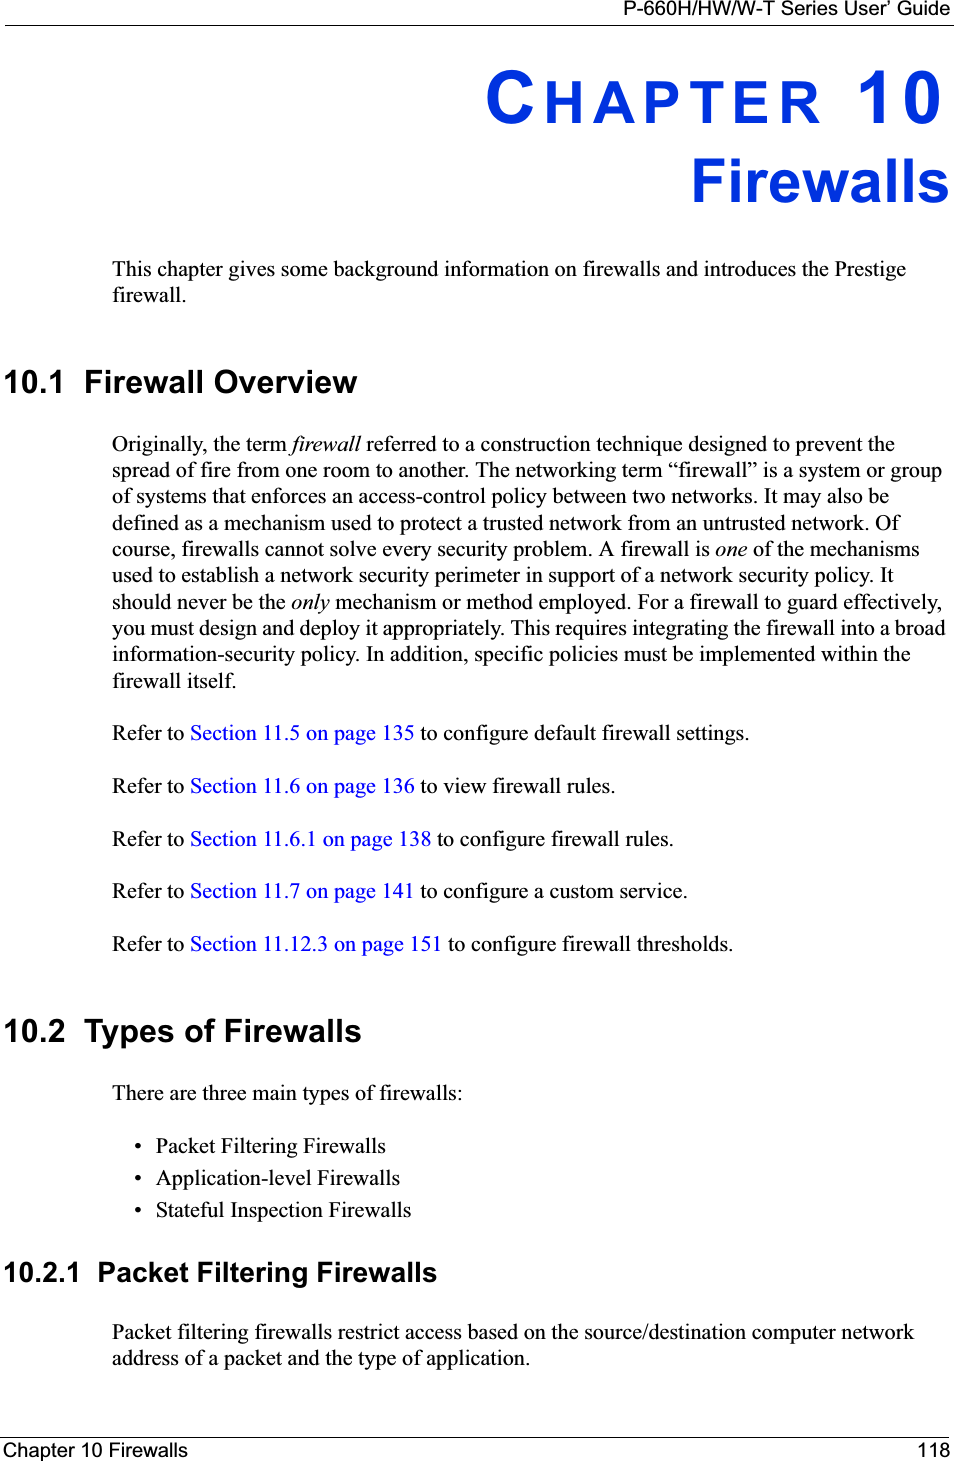 P-660H/HW/W-T Series User’ GuideChapter 10 Firewalls 118CHAPTER 10FirewallsThis chapter gives some background information on firewalls and introduces the Prestige firewall.10.1  Firewall Overview Originally, the term firewall referred to a construction technique designed to prevent the spread of fire from one room to another. The networking term “firewall” is a system or group of systems that enforces an access-control policy between two networks. It may also be defined as a mechanism used to protect a trusted network from an untrusted network. Of course, firewalls cannot solve every security problem. A firewall is one of the mechanisms used to establish a network security perimeter in support of a network security policy. It should never be the only mechanism or method employed. For a firewall to guard effectively, you must design and deploy it appropriately. This requires integrating the firewall into a broad information-security policy. In addition, specific policies must be implemented within the firewall itself. Refer to Section 11.5 on page 135 to configure default firewall settings. Refer to Section 11.6 on page 136 to view firewall rules. Refer to Section 11.6.1 on page 138 to configure firewall rules. Refer to Section 11.7 on page 141 to configure a custom service. Refer to Section 11.12.3 on page 151 to configure firewall thresholds. 10.2  Types of FirewallsThere are three main types of firewalls:• Packet Filtering Firewalls• Application-level Firewalls• Stateful Inspection Firewalls10.2.1  Packet Filtering FirewallsPacket filtering firewalls restrict access based on the source/destination computer network address of a packet and the type of application. 